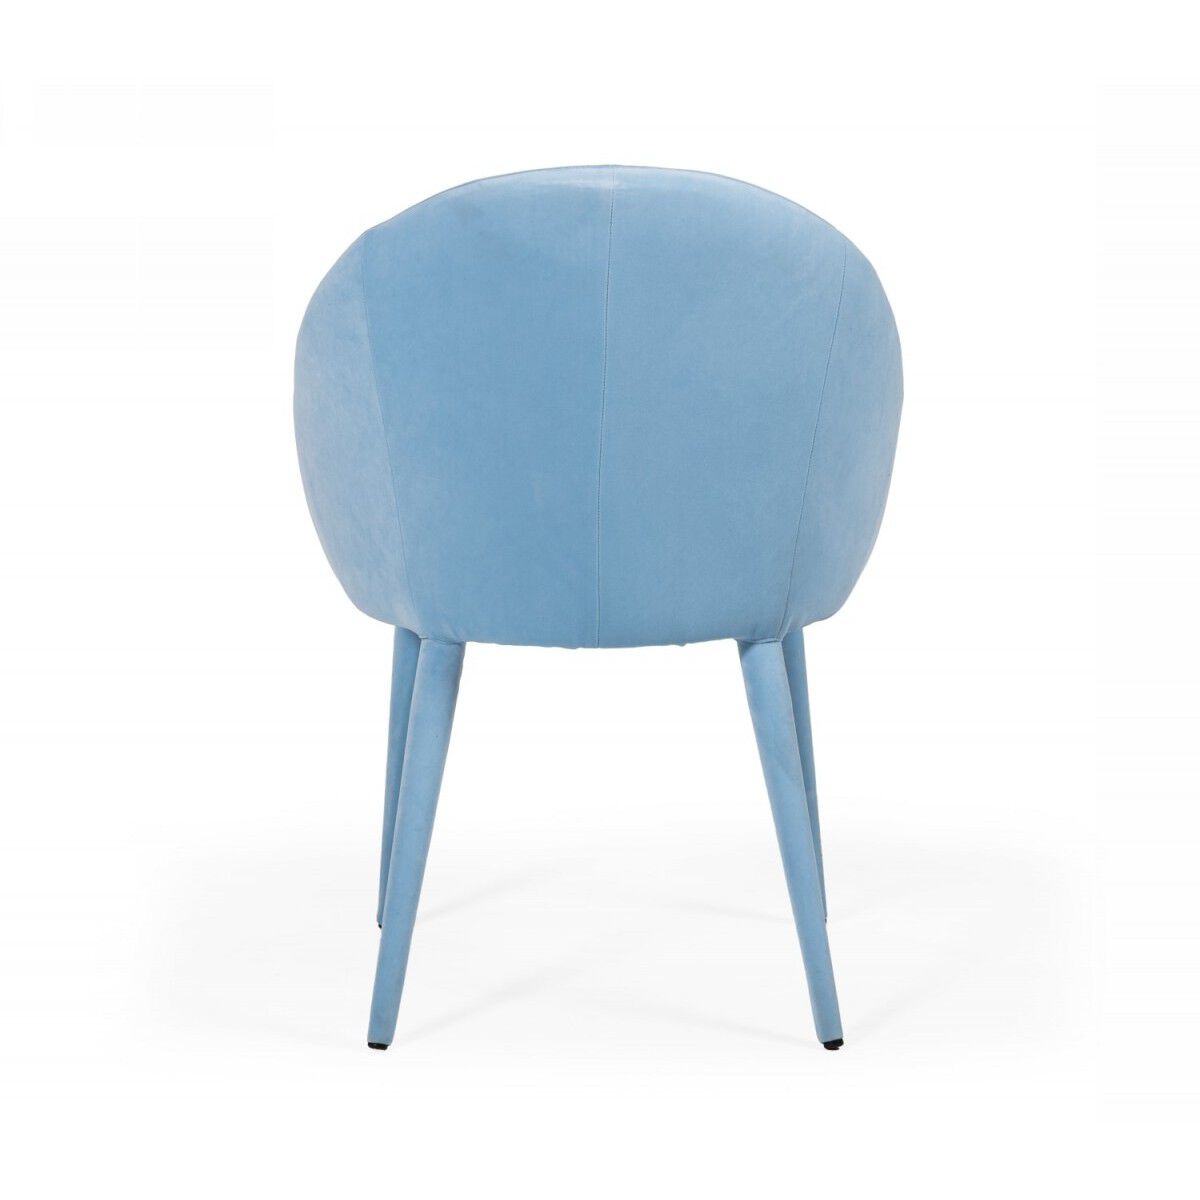 Fabric Upholstered Wooden Dining Chair with Curved Back, Blue